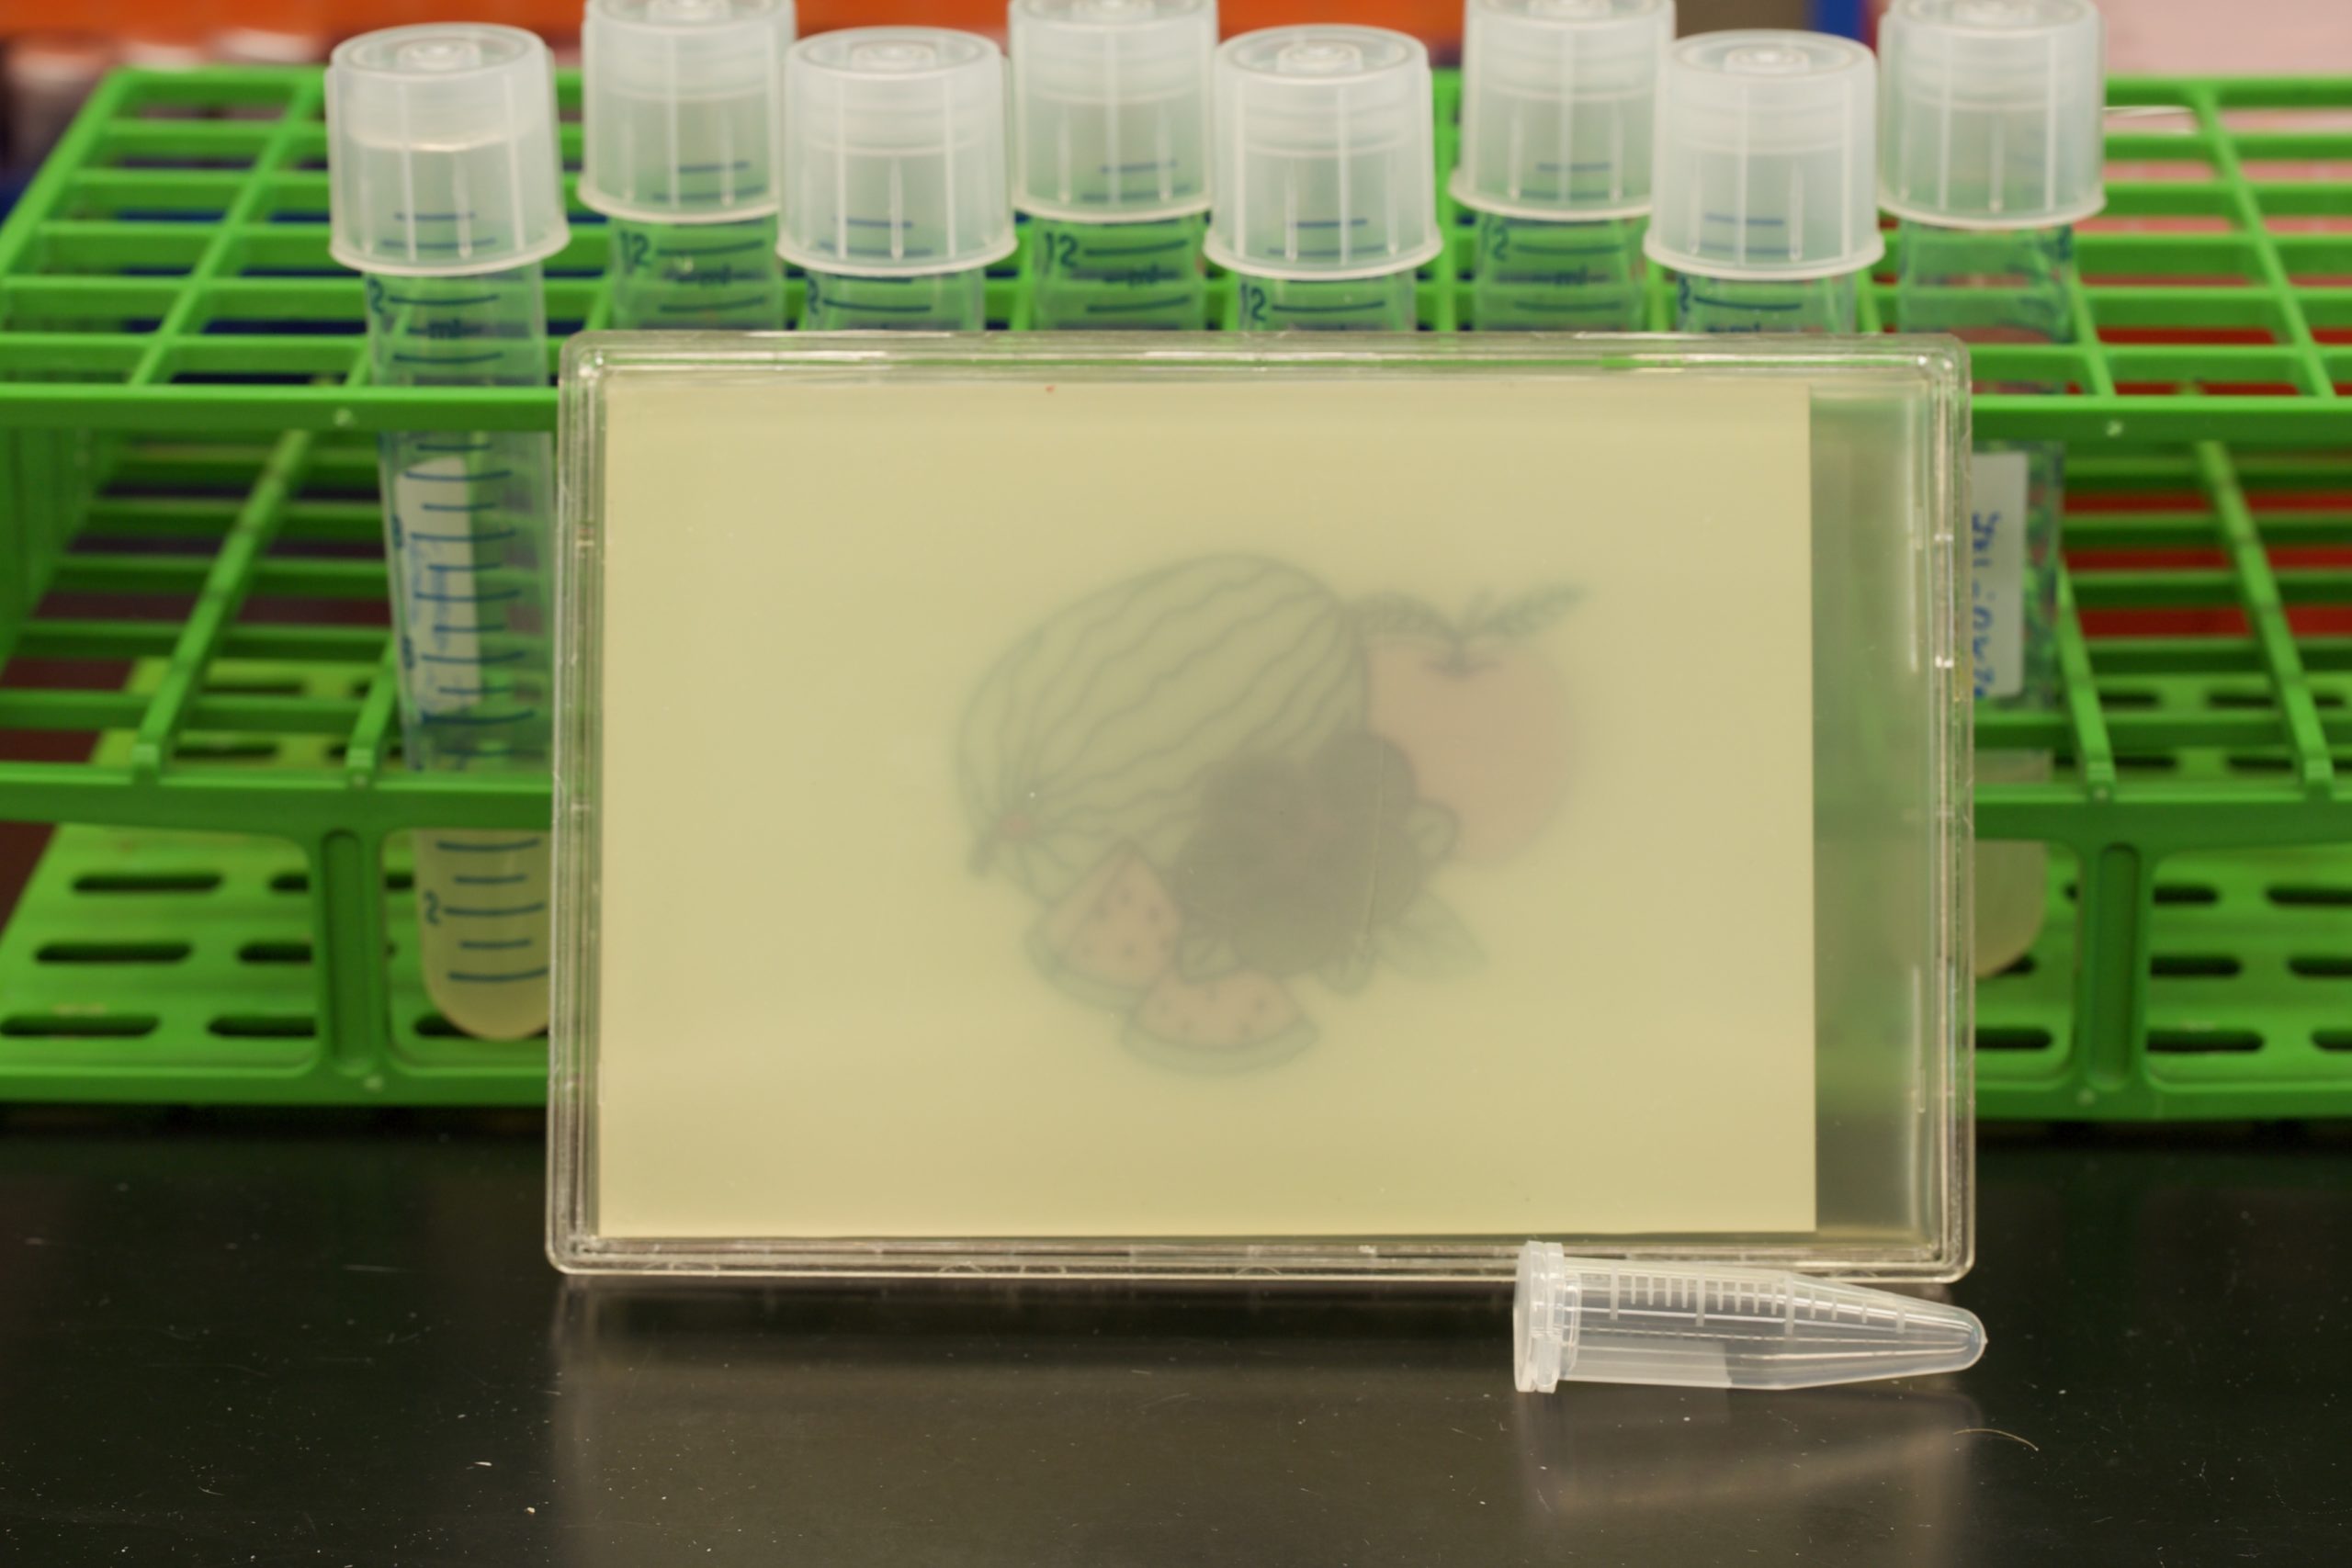 Scientists Engineered Bacteria To Make Picture Of Super Mario